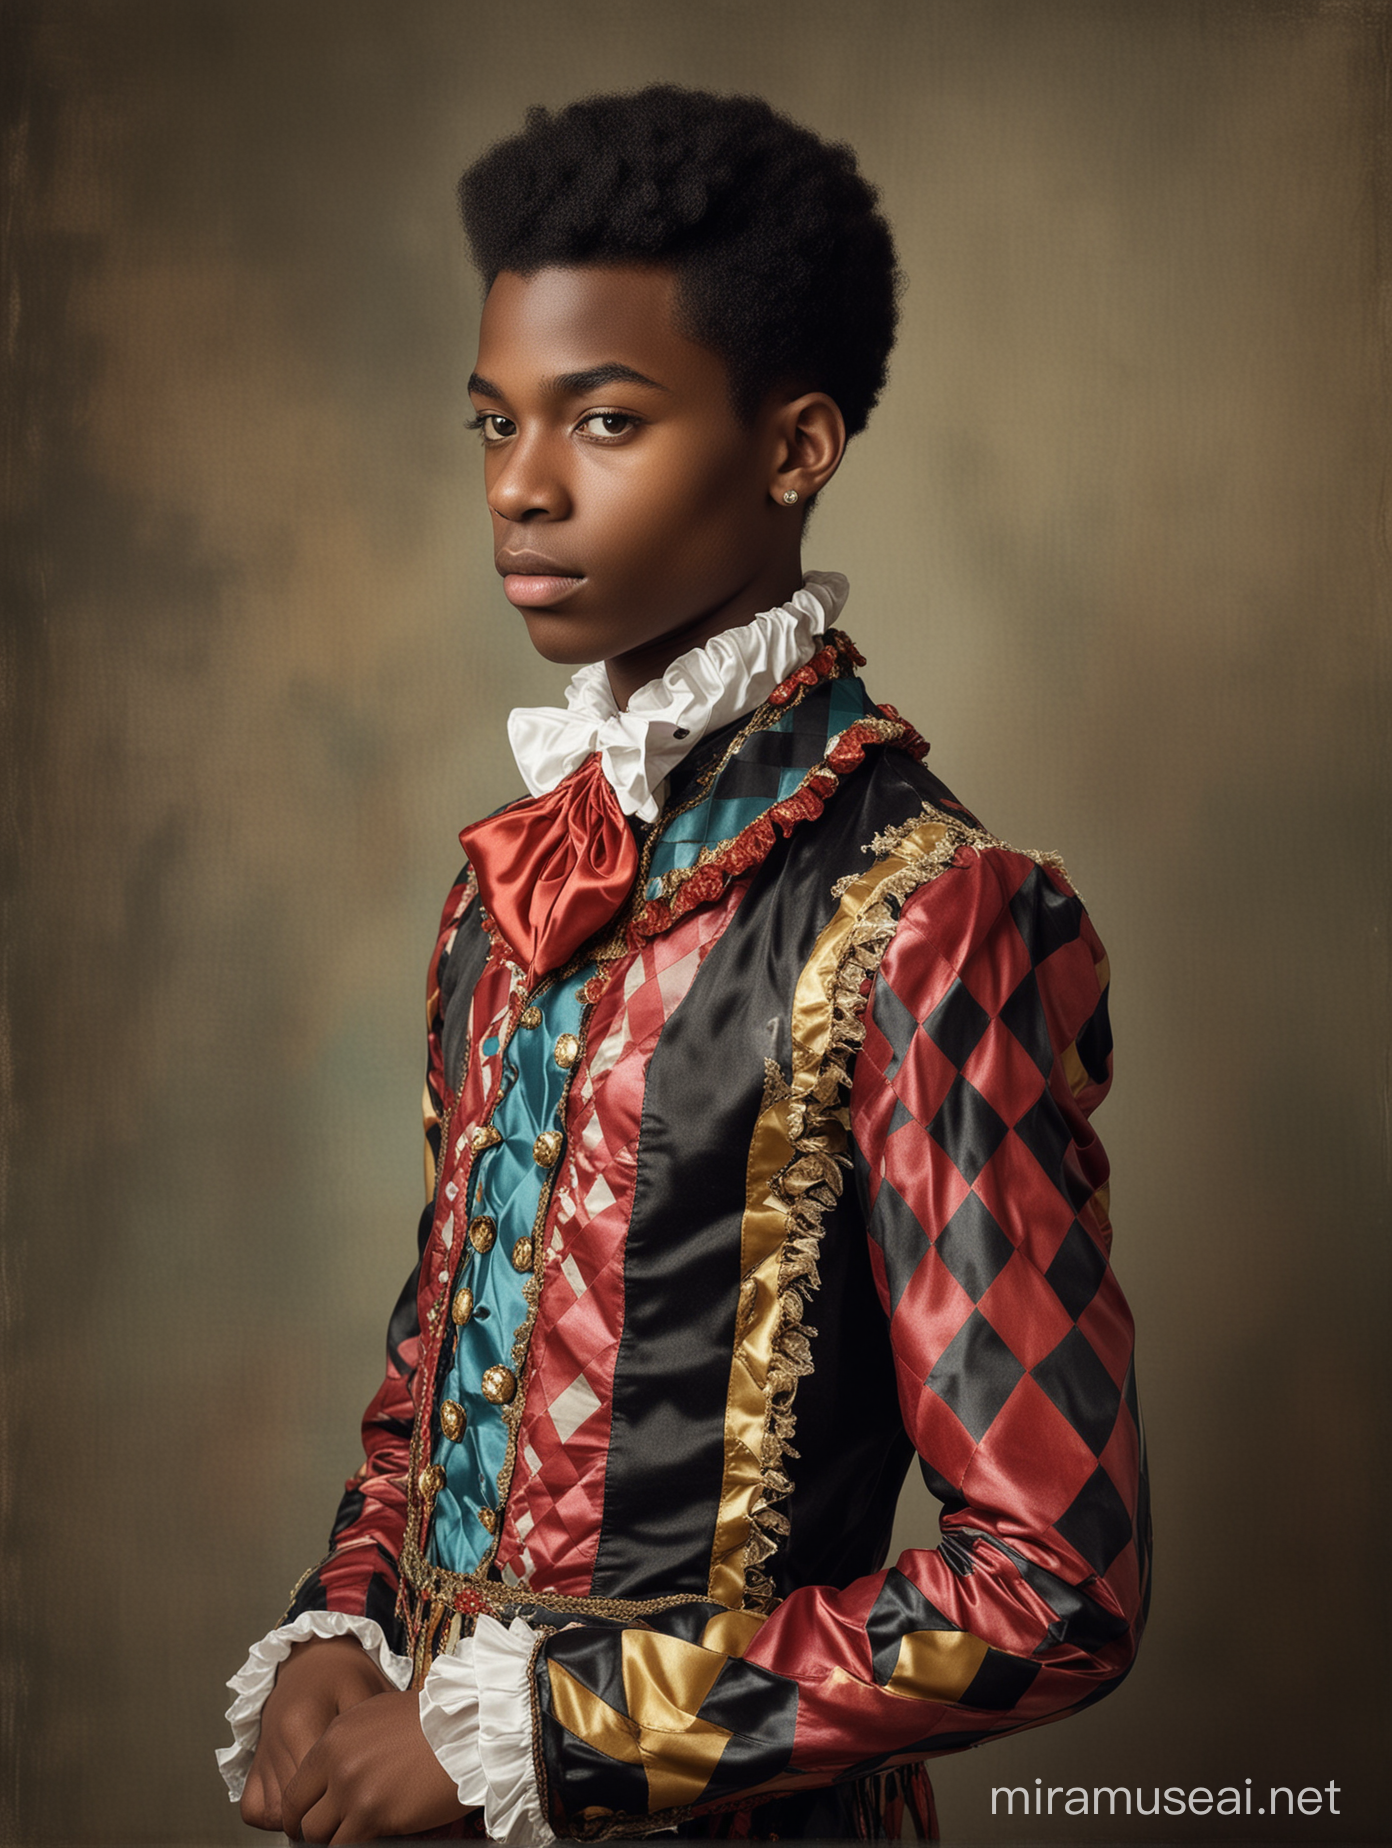 Charming Black Teen in Harlequin Costume Poses in Vintage Setting